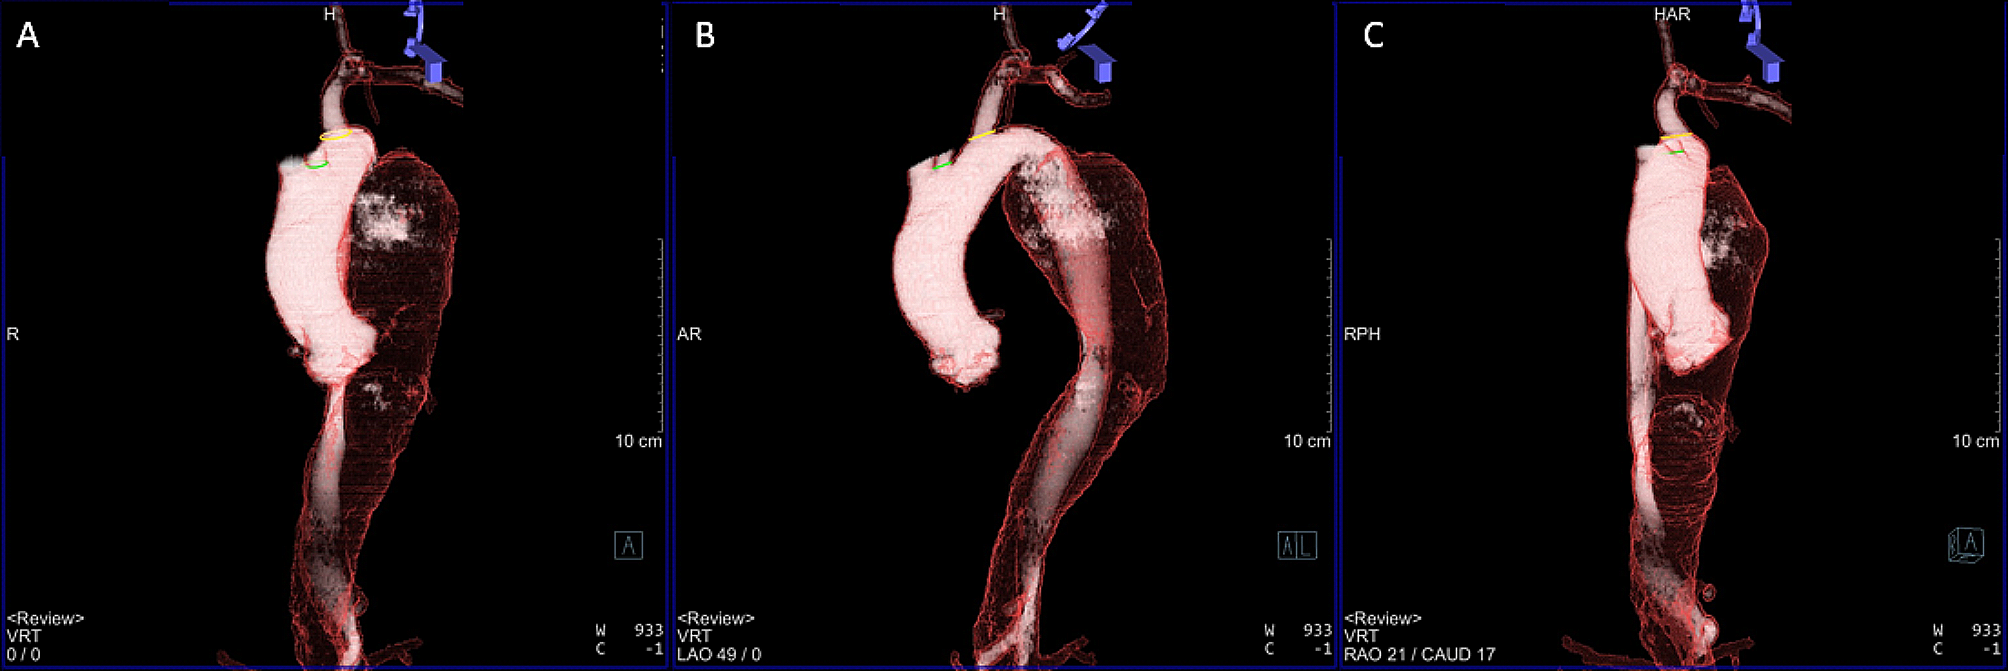 Image fusion guidance for left subclavian artery in situ fenestration during thoracic endovascular repair